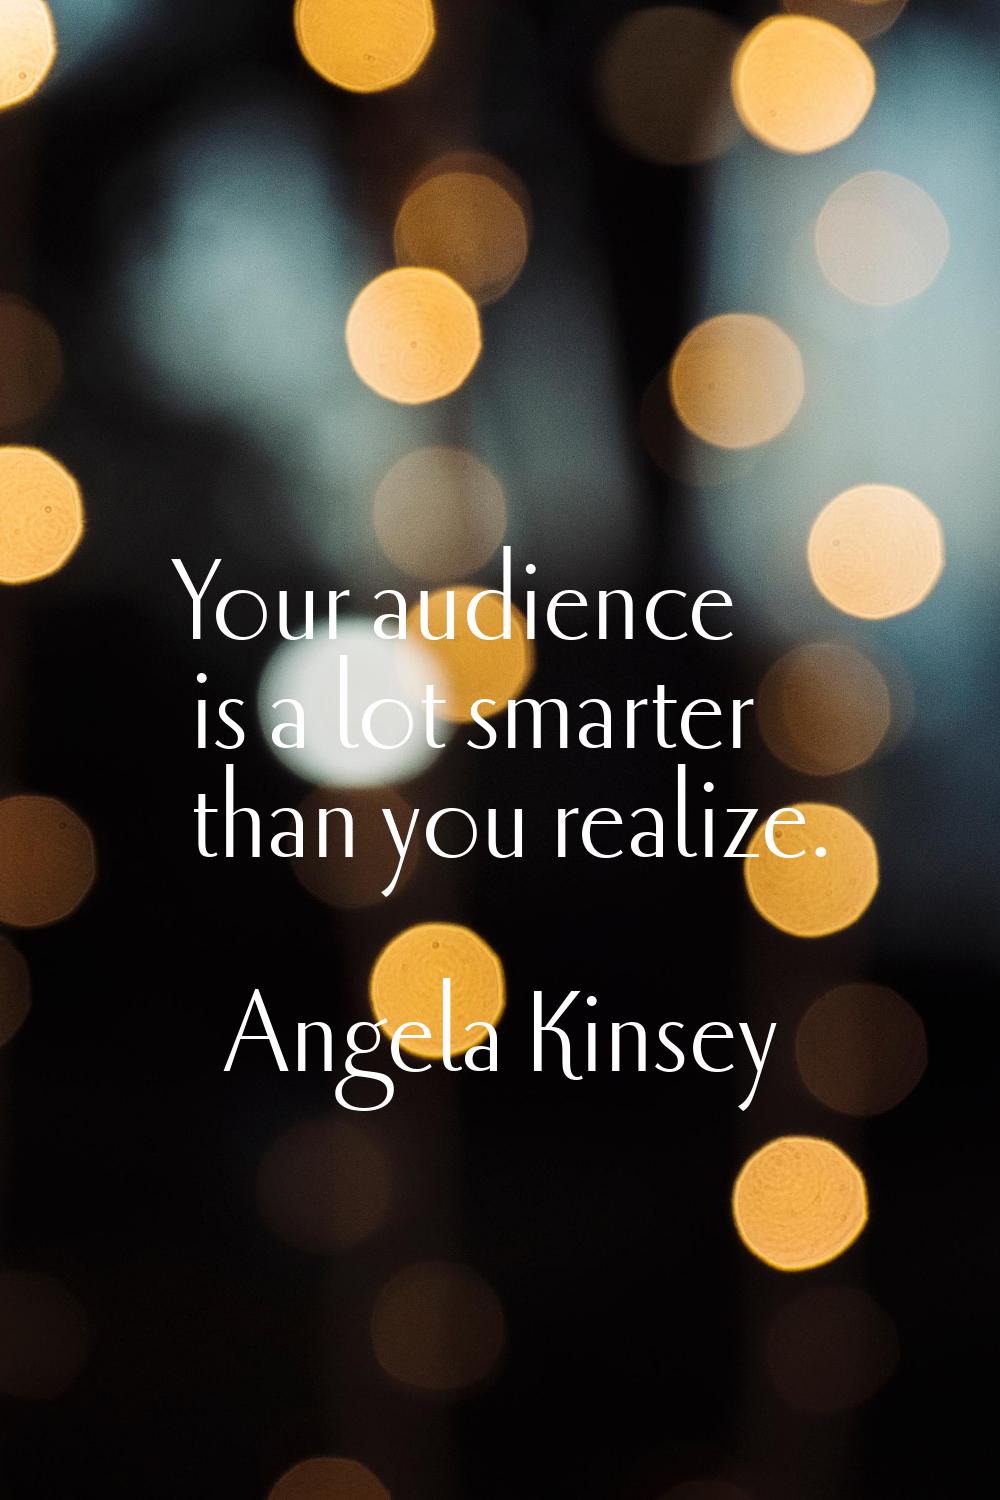 Your audience is a lot smarter than you realize.